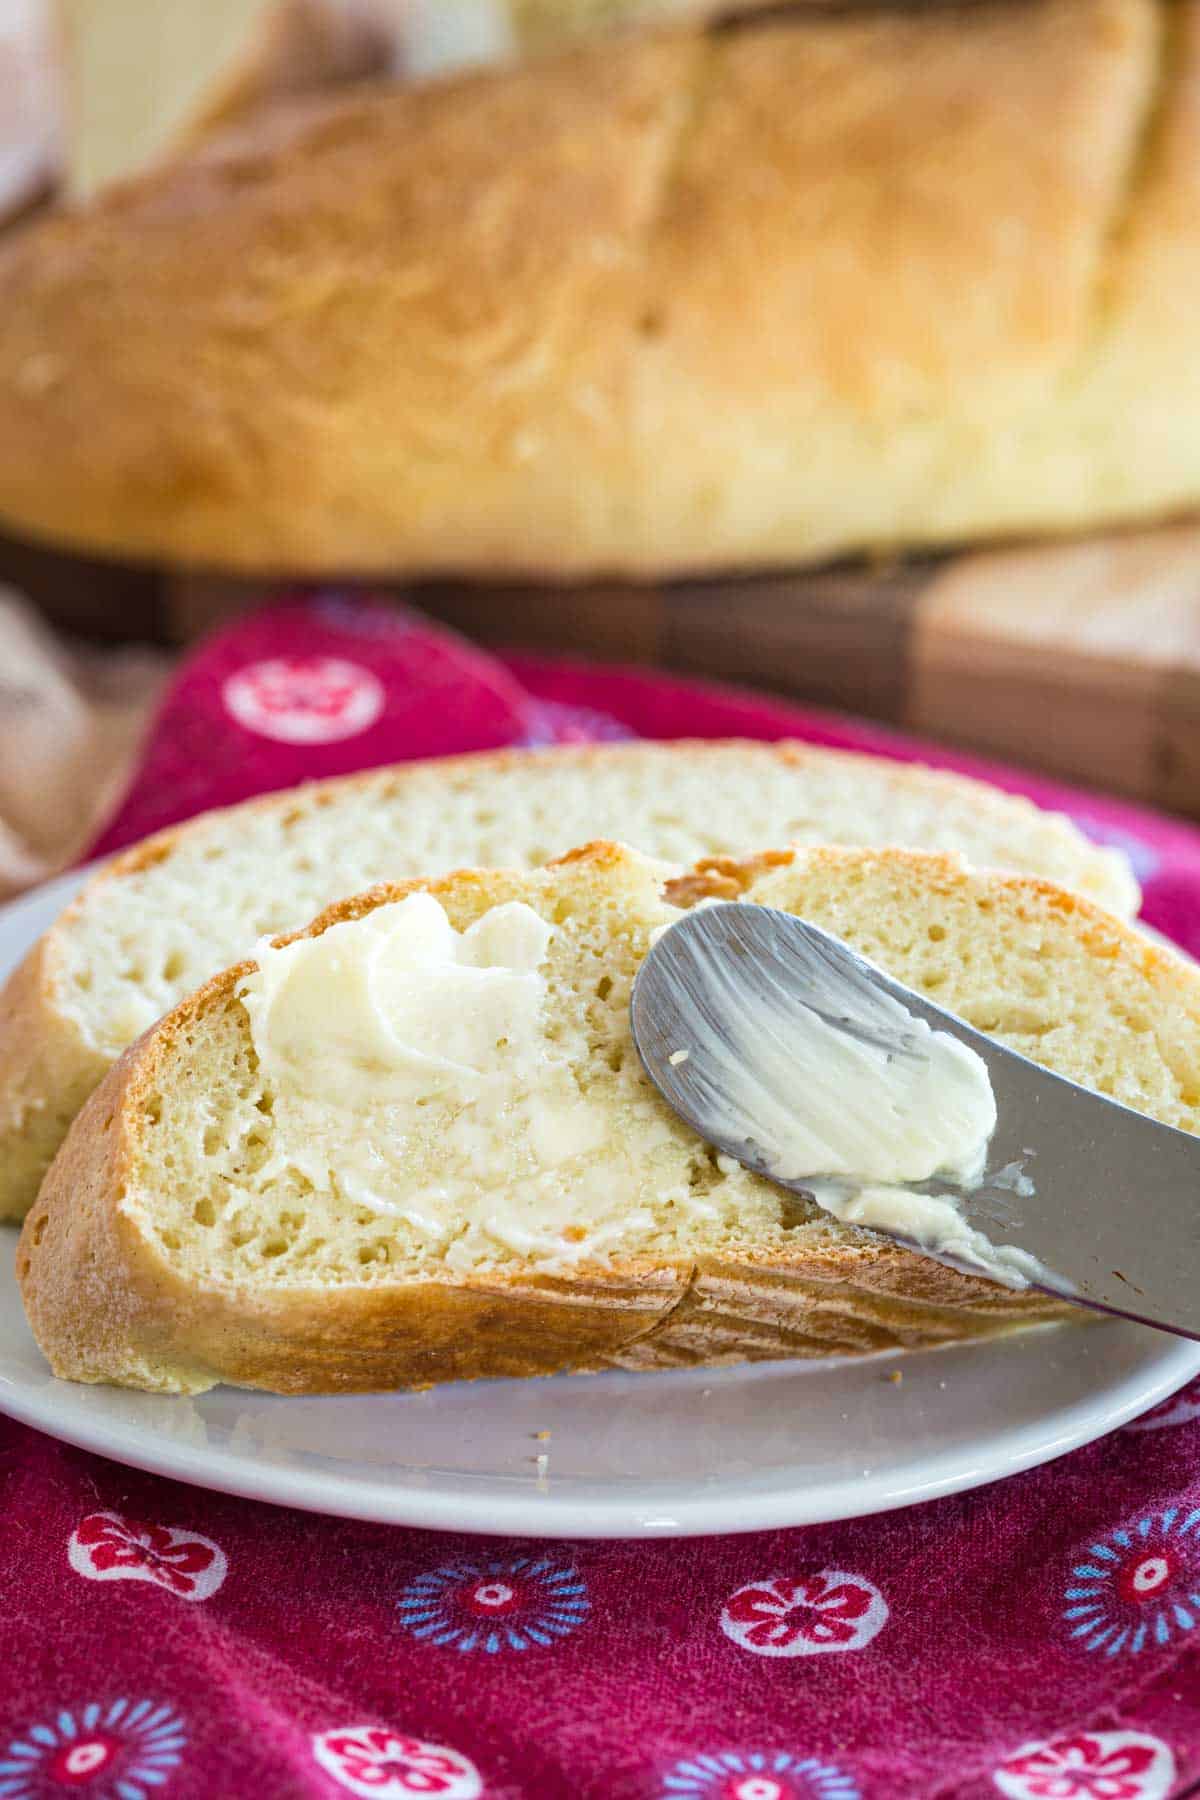 A buttered slice of gluten free French baguette with a butter knife.